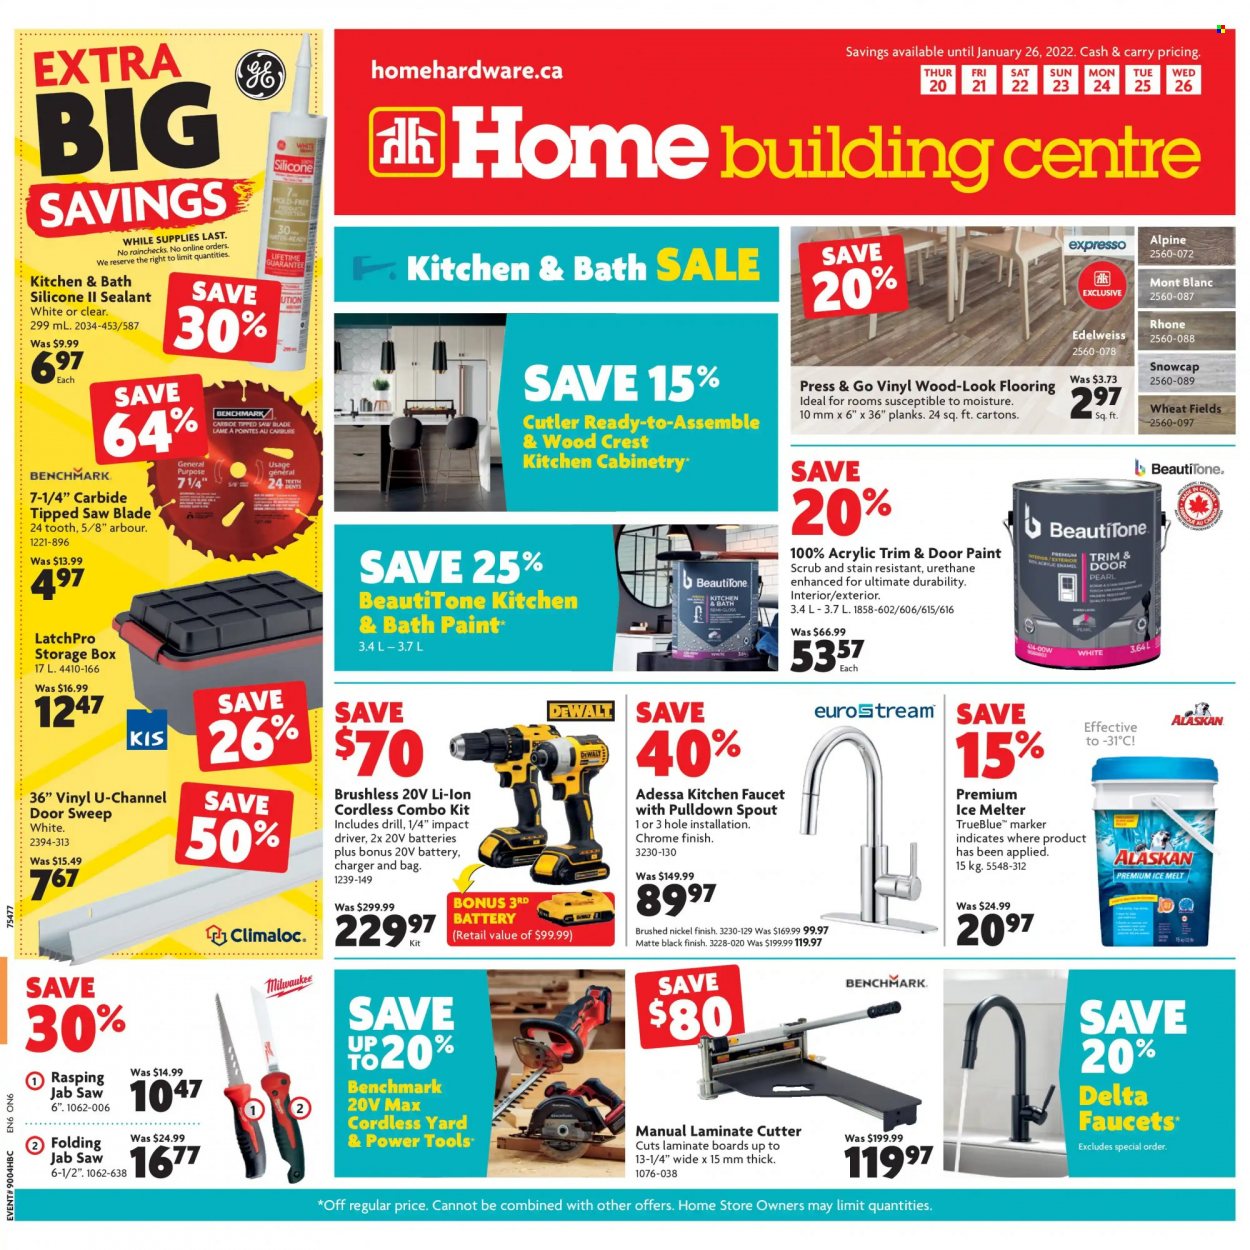 Home Building Centre flyer  - January 20, 2022 - January 26, 2022.